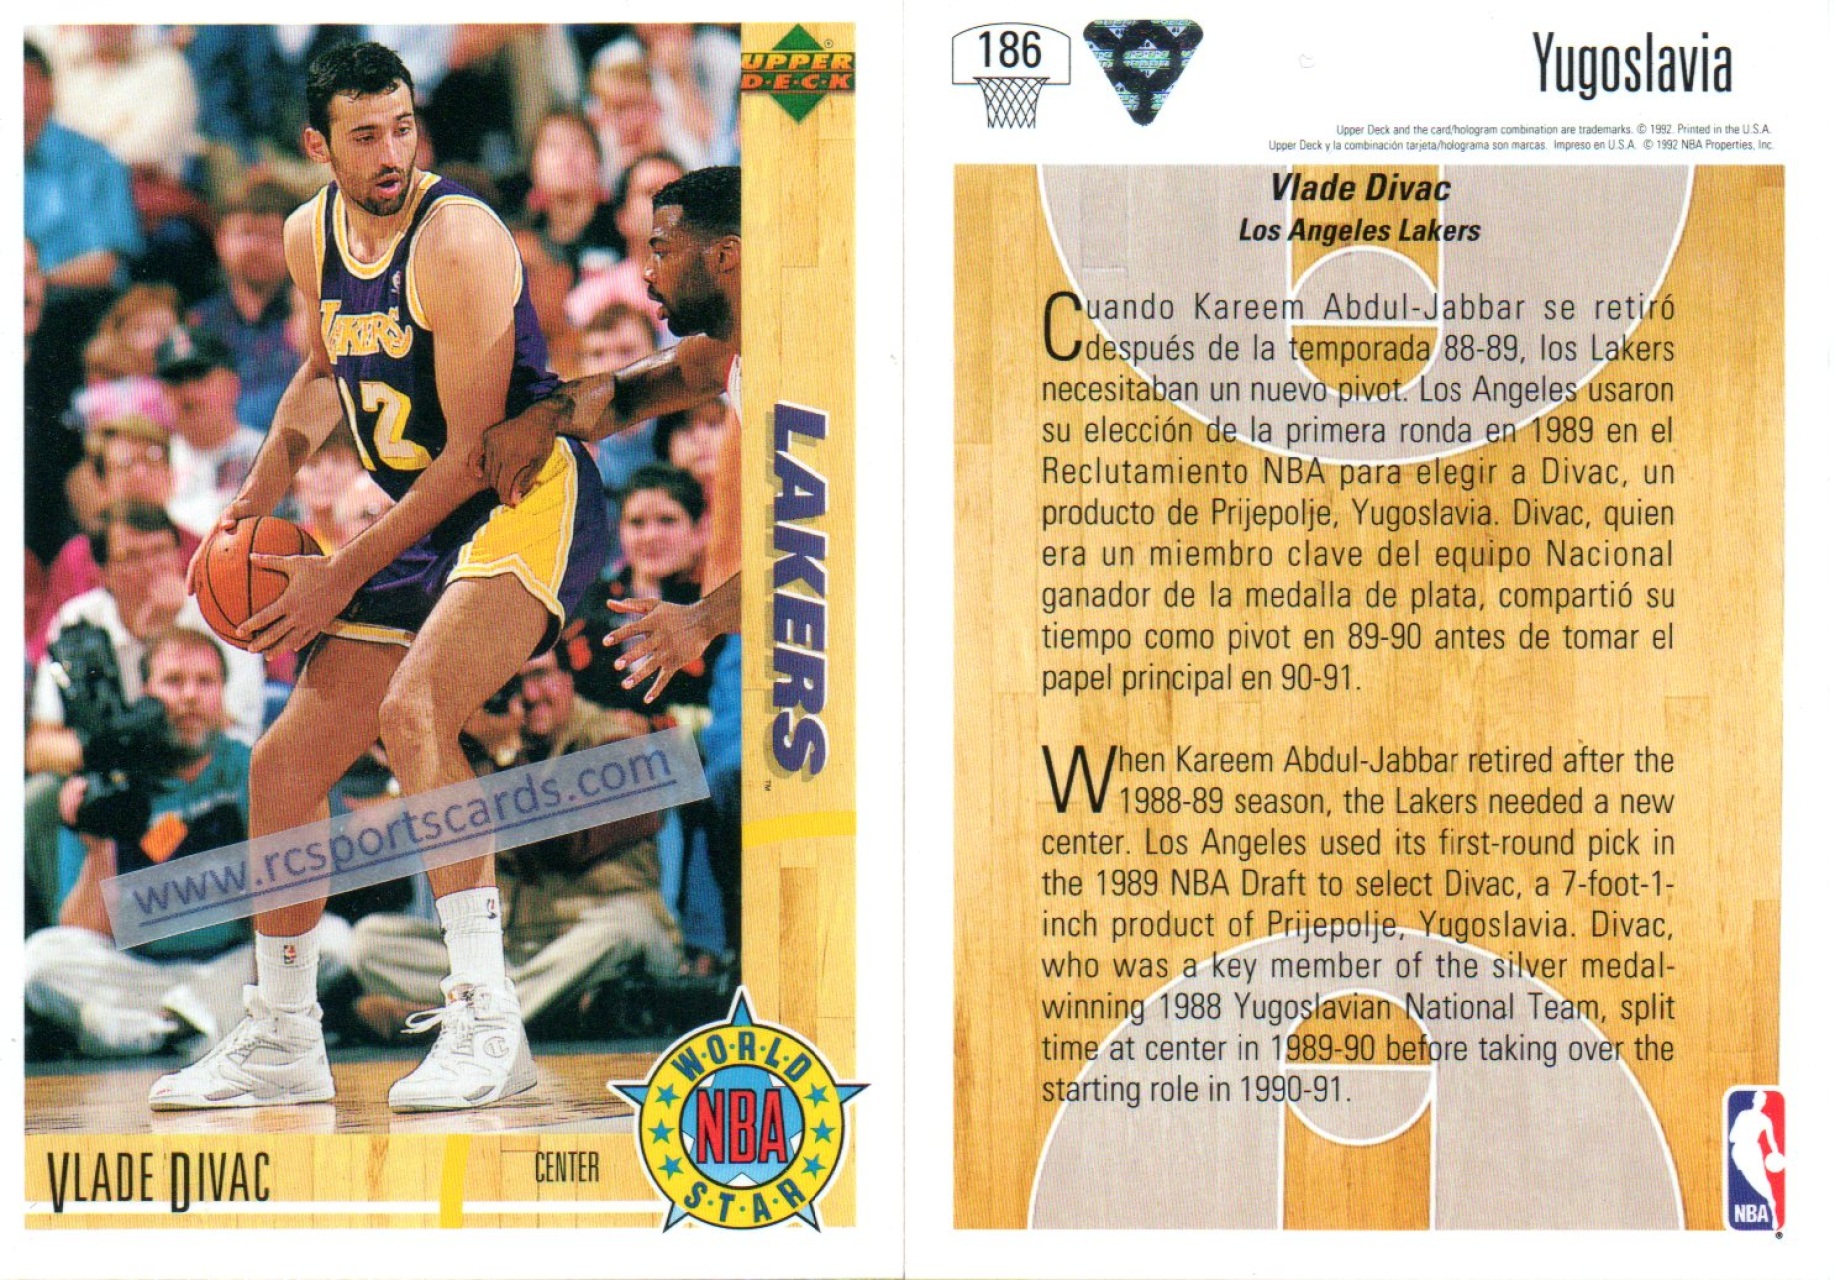 1992-93 Hoops #410 ANTHONY PEELER RC Los Angeles Lakers ~D8A